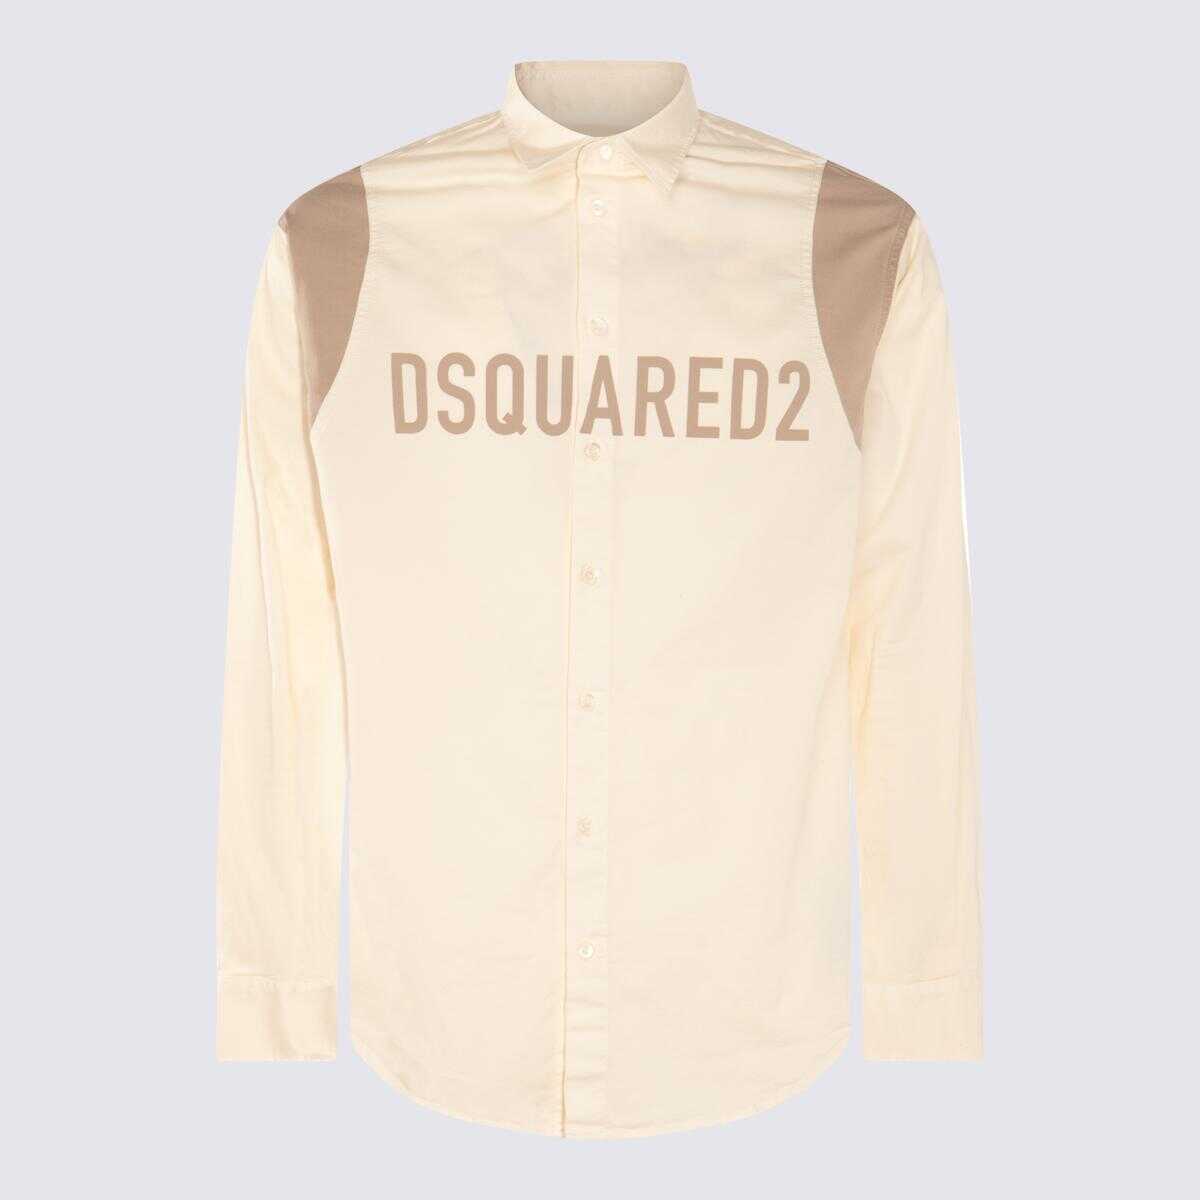 DSQUARED2 DSQUARED2 CREAM AND BEIGE COTTON BLEND SHIRT 0FF-WHITE